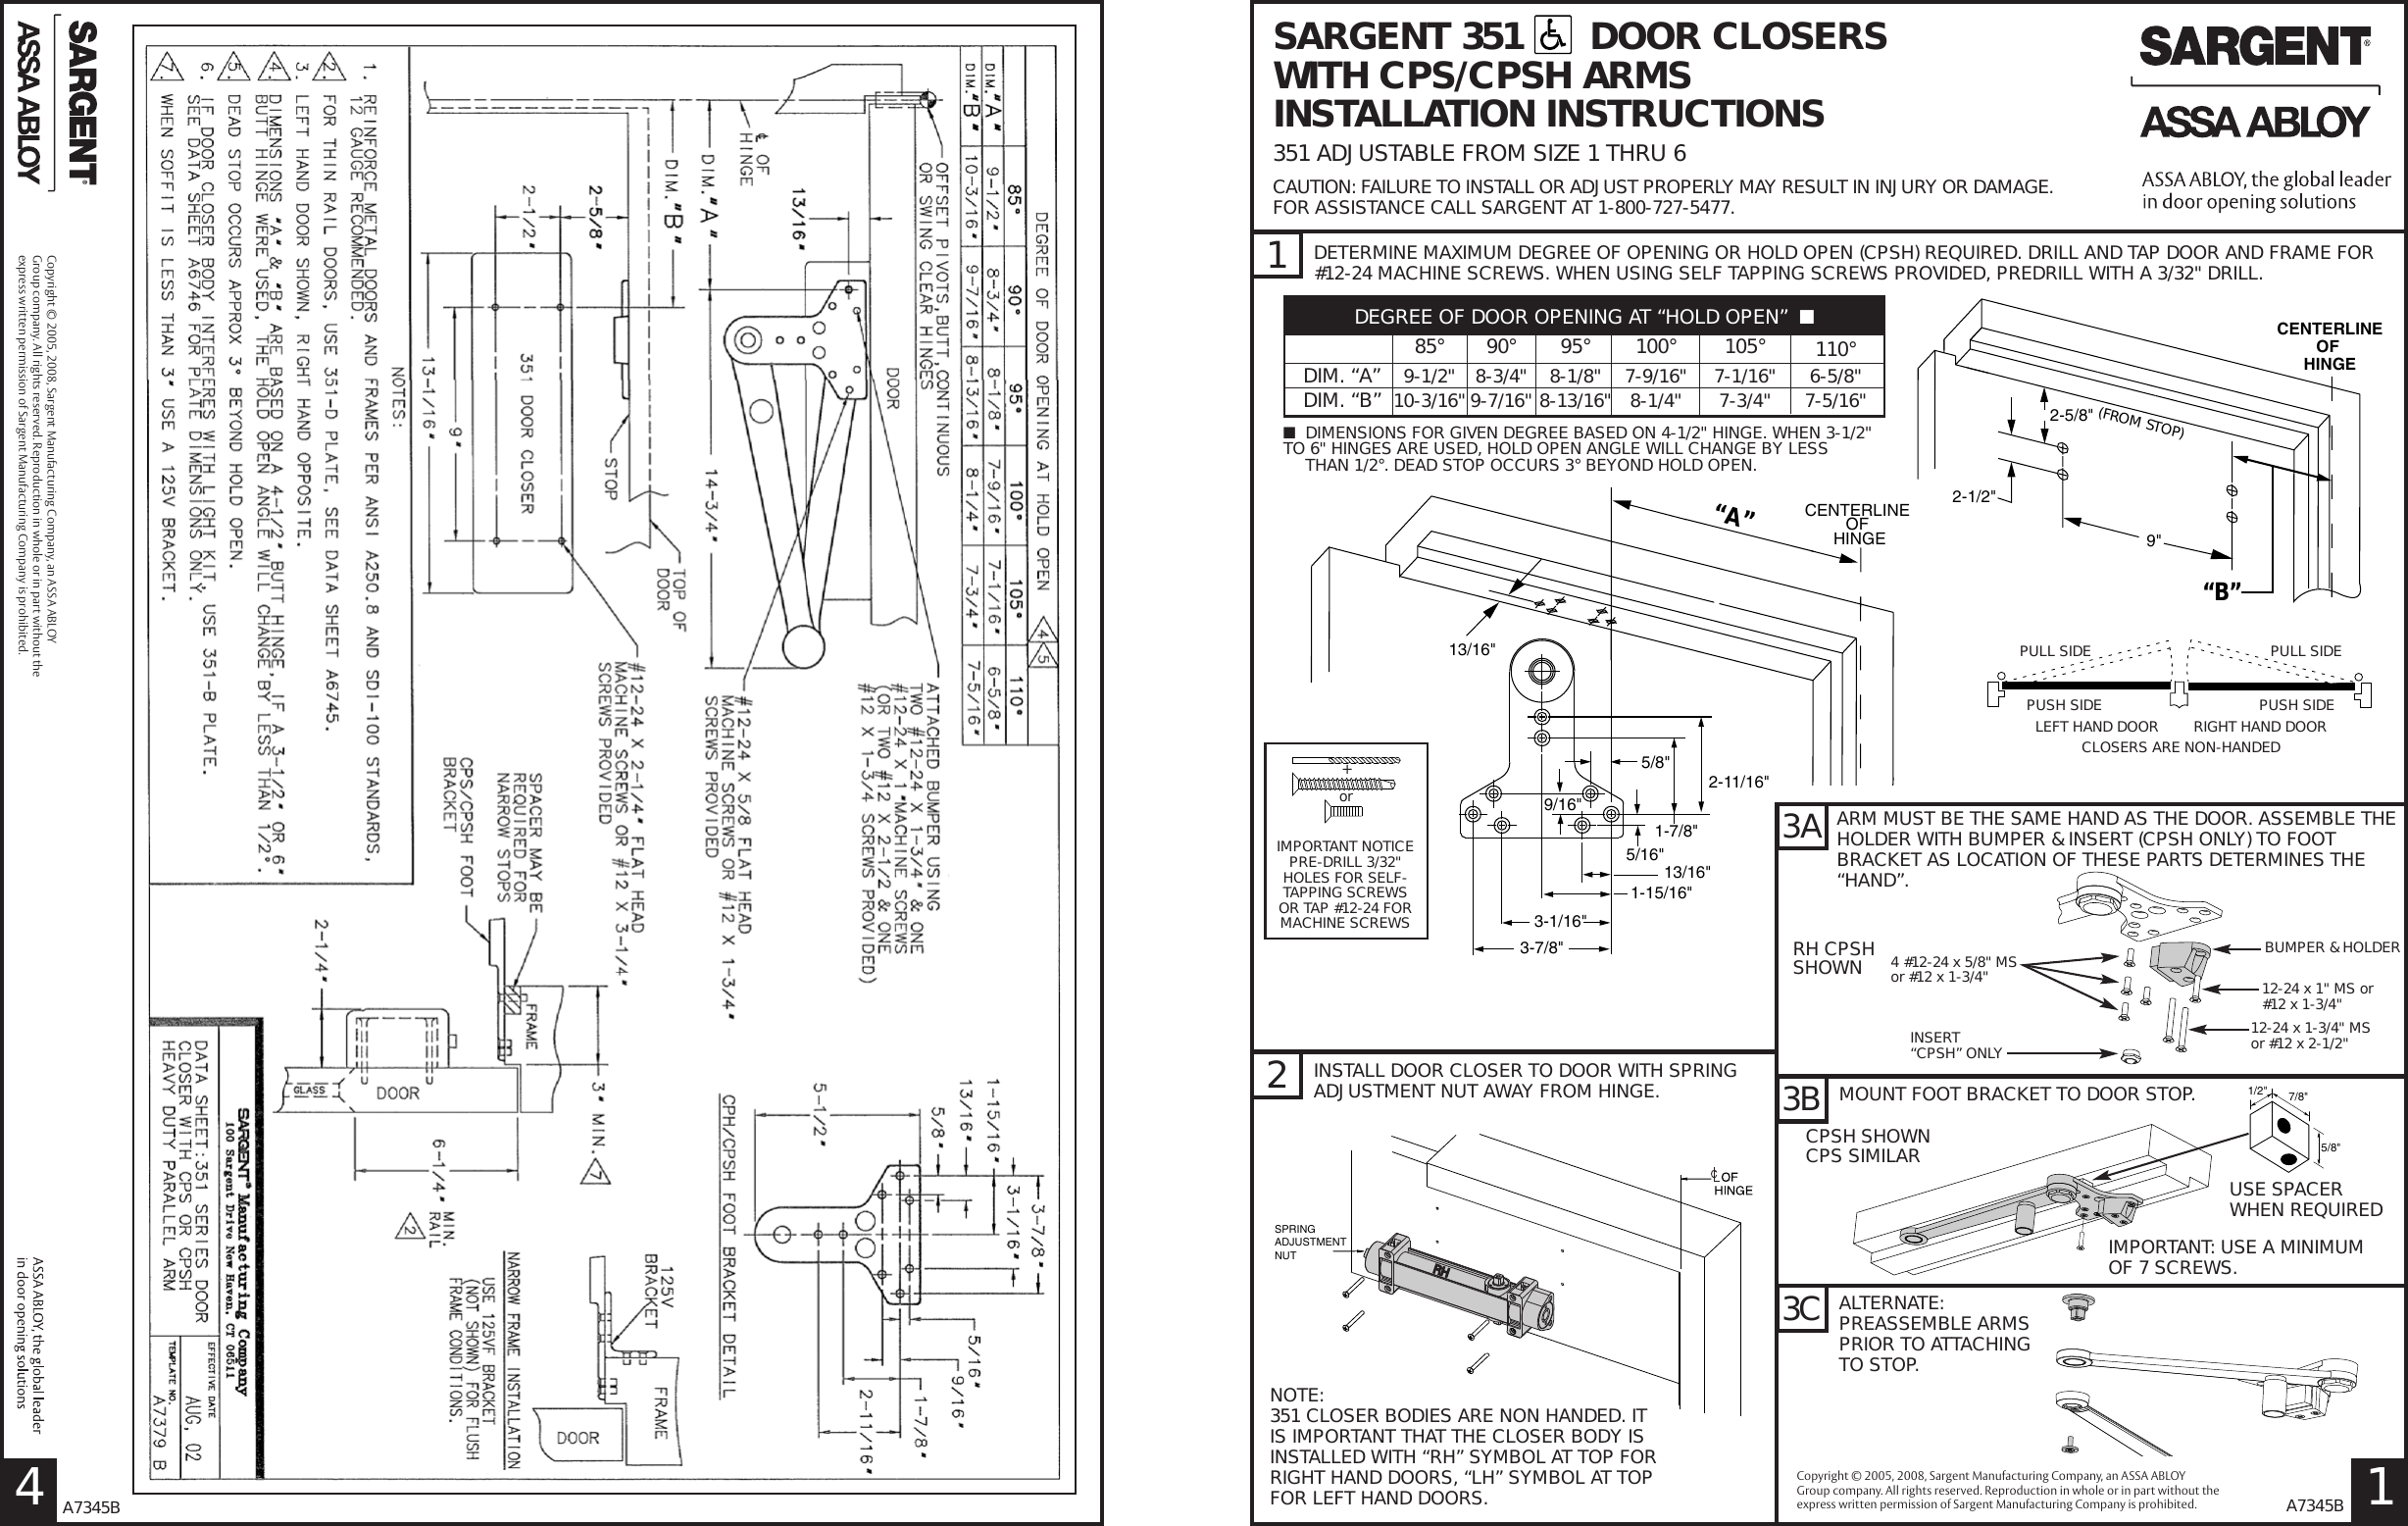 Page 1 of 4 - Sargent 351 Series Door Closers With CPS & CPSH Holder Arms Installation Instructions A7345